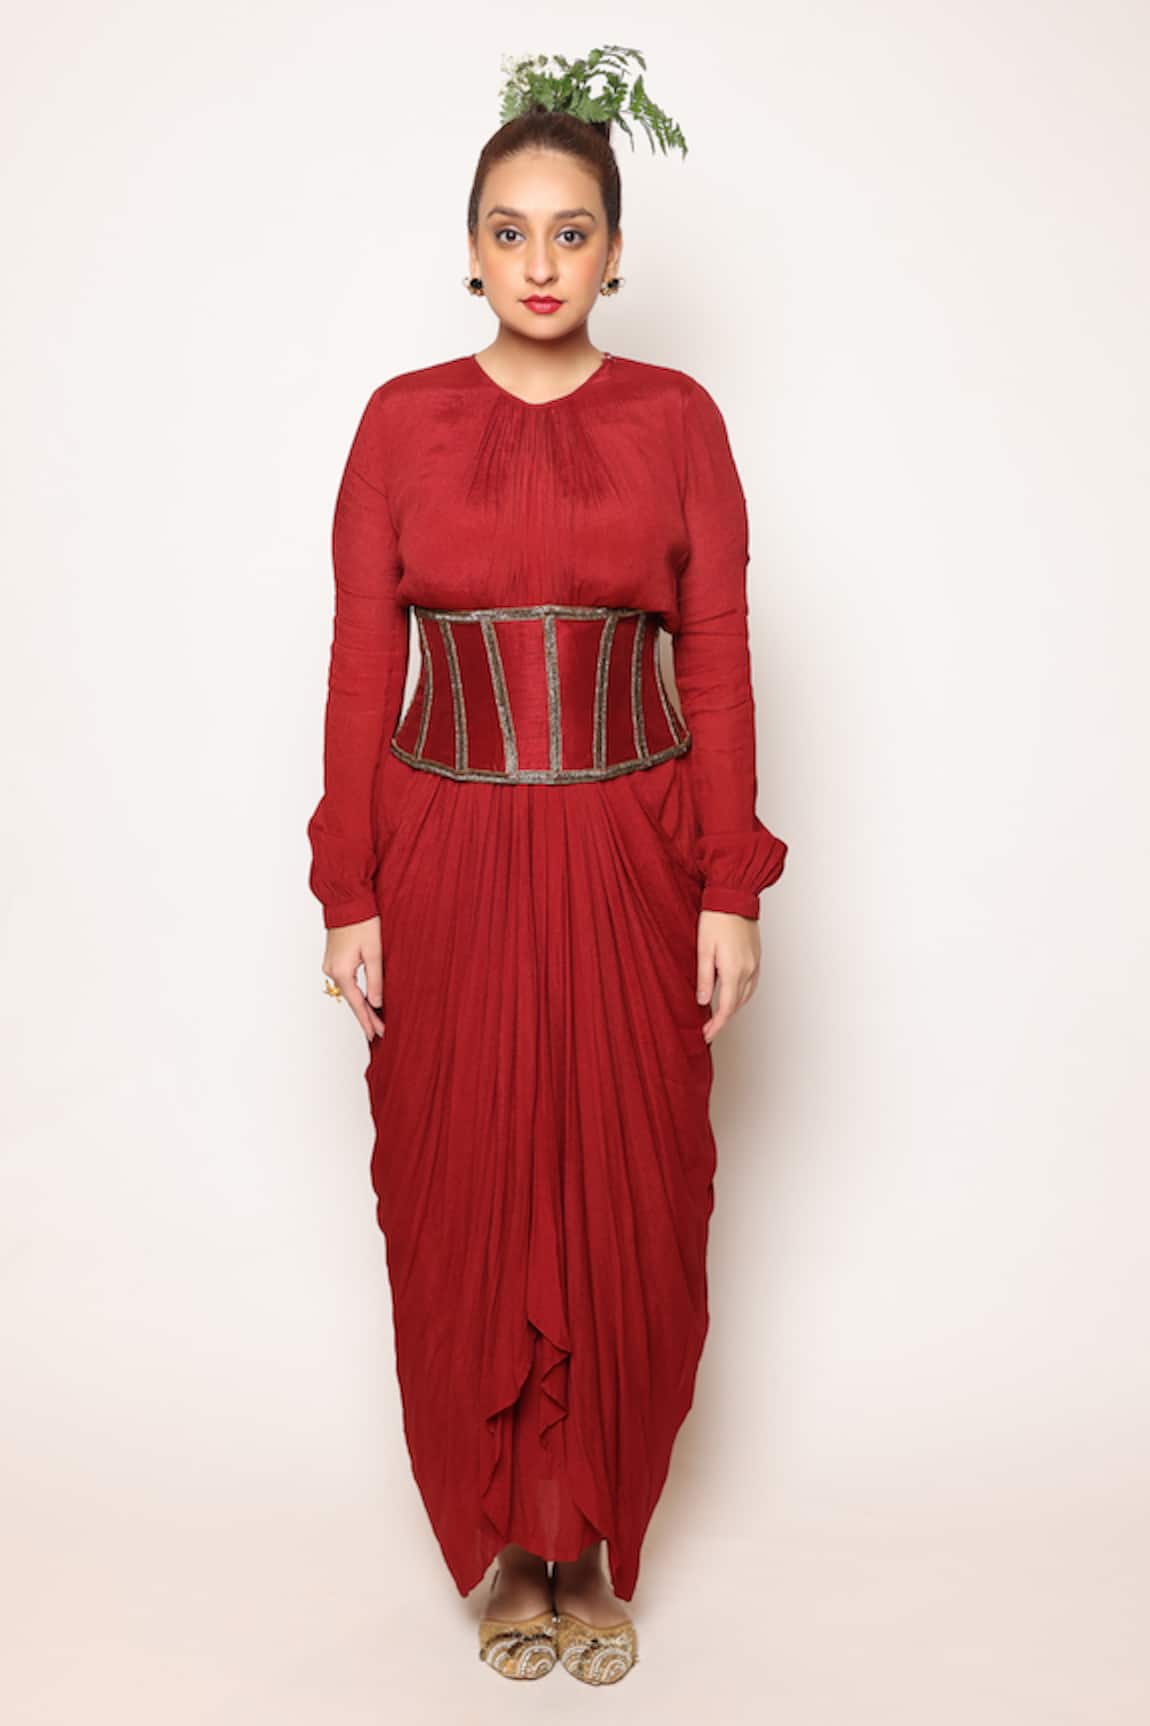 ABSTRACT BY MEGHA JAIN MADAAN Draped Dress With Embellished Corset